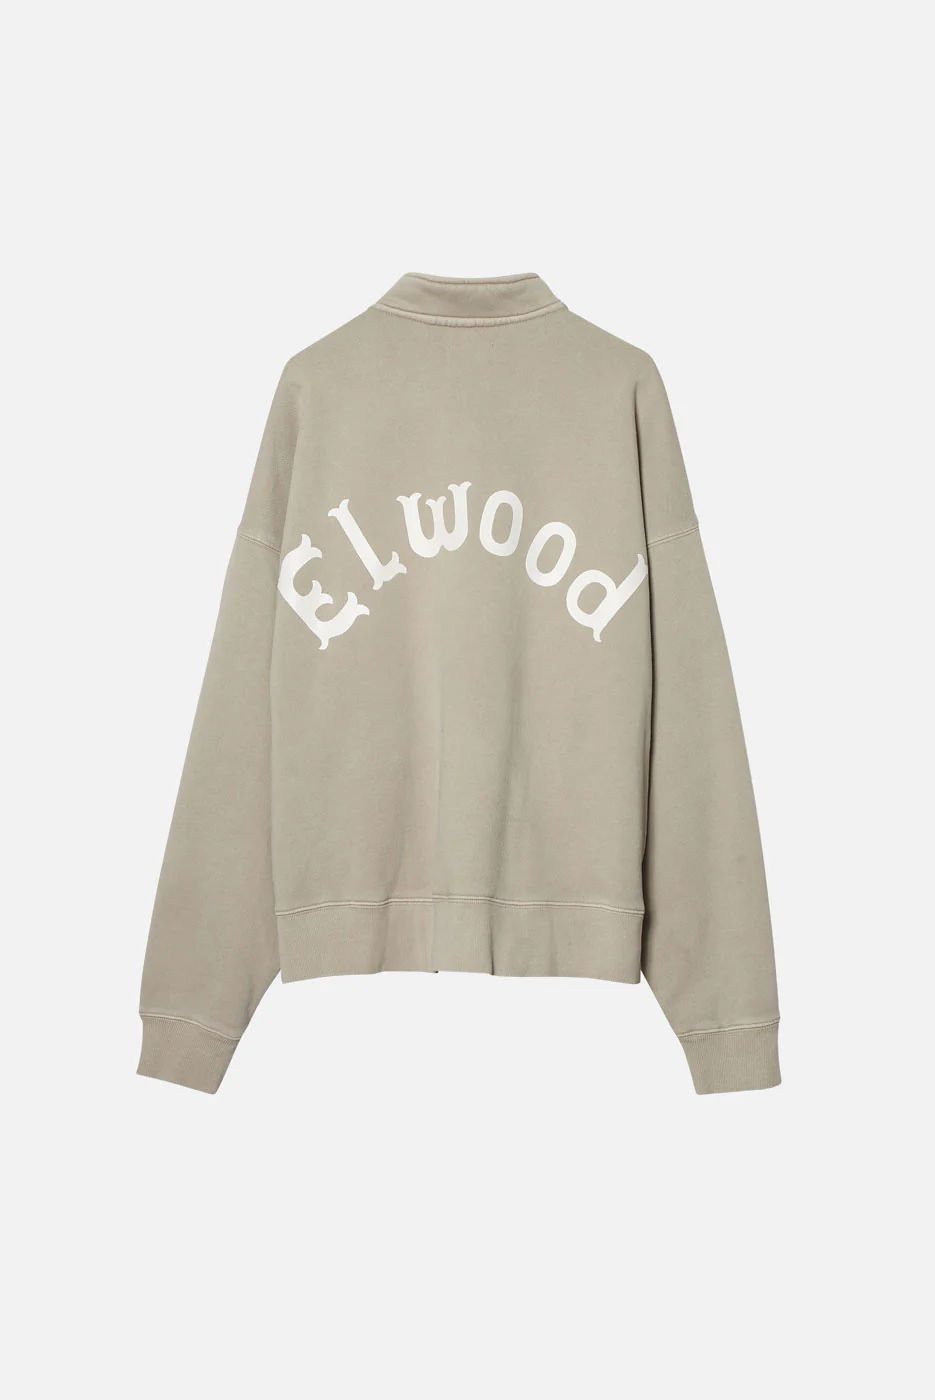 1/4 ZIP PULLOVER | Elwood Clothing